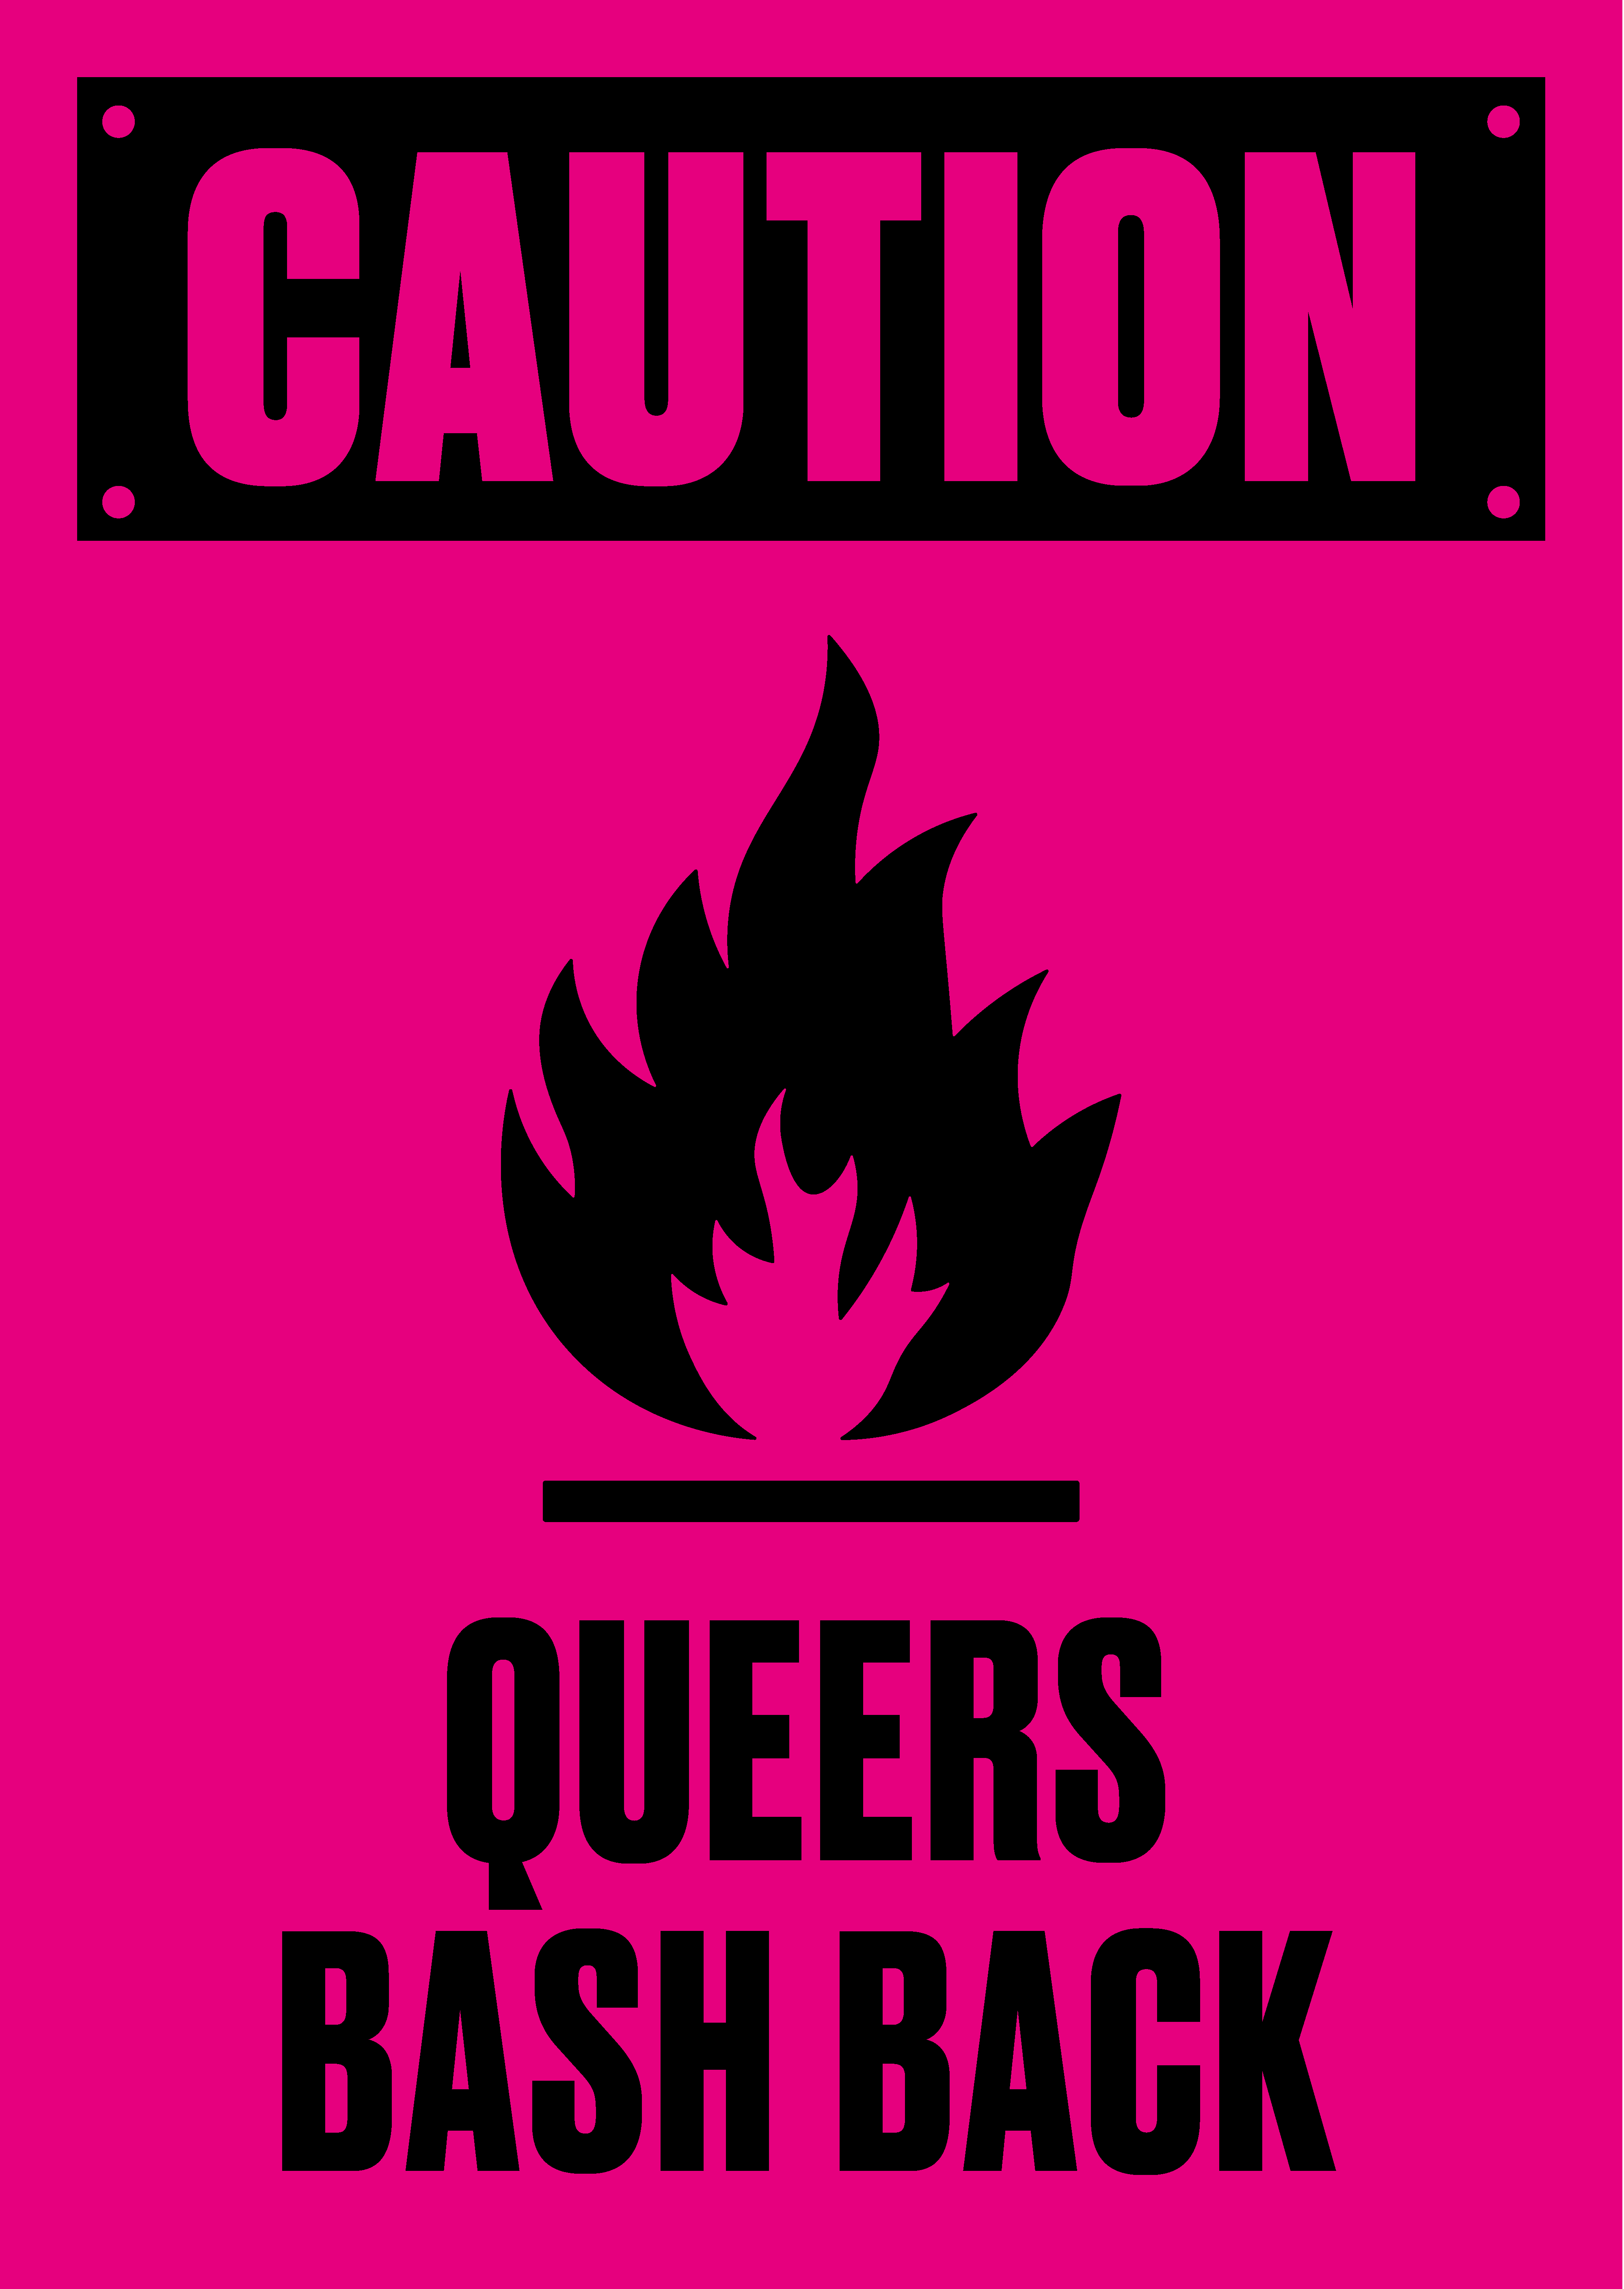 Caution: Queers Bash Back